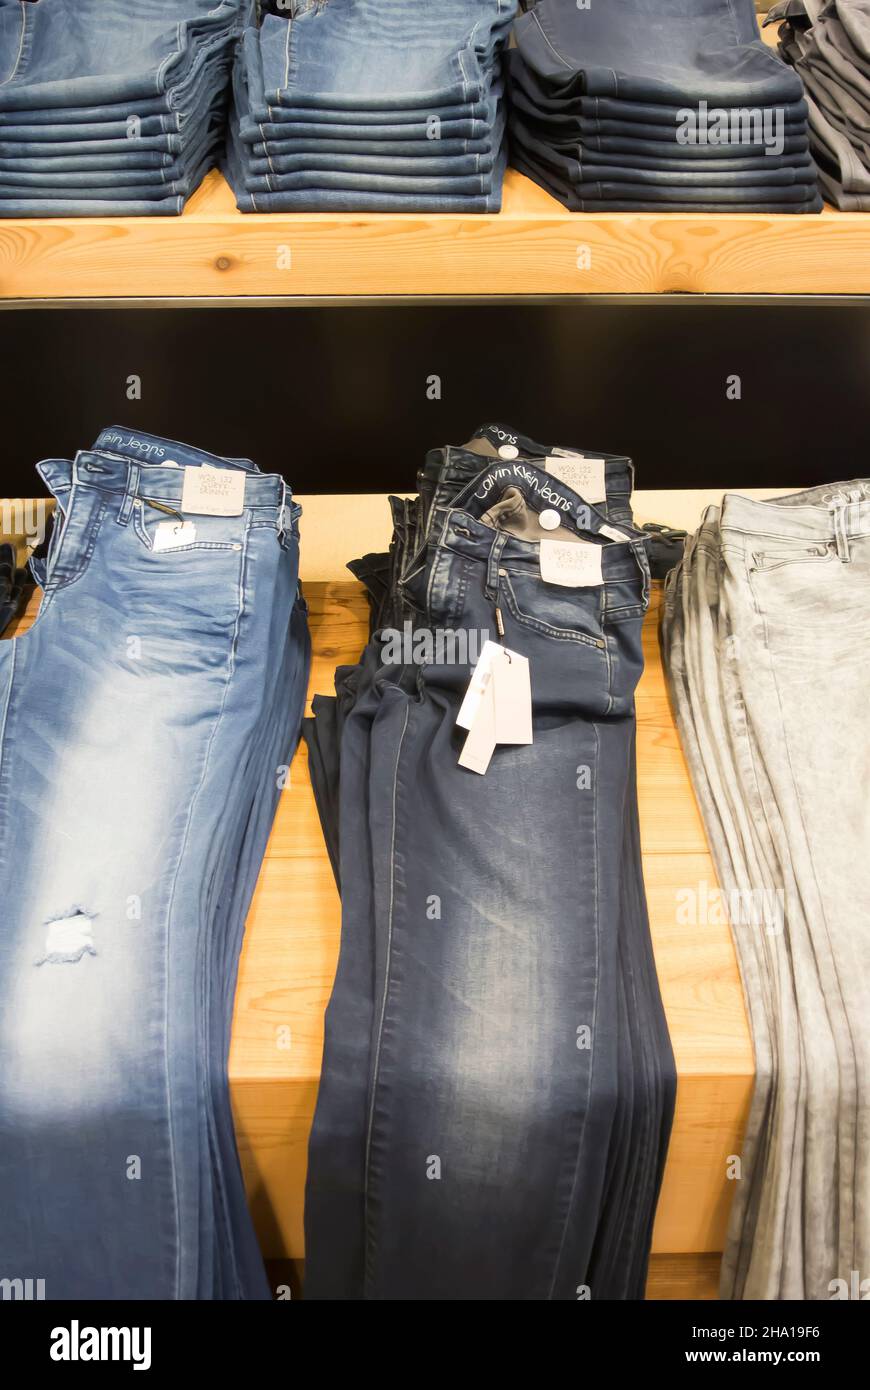 Jeans Displayed on Shelves for Sale Stock Photo